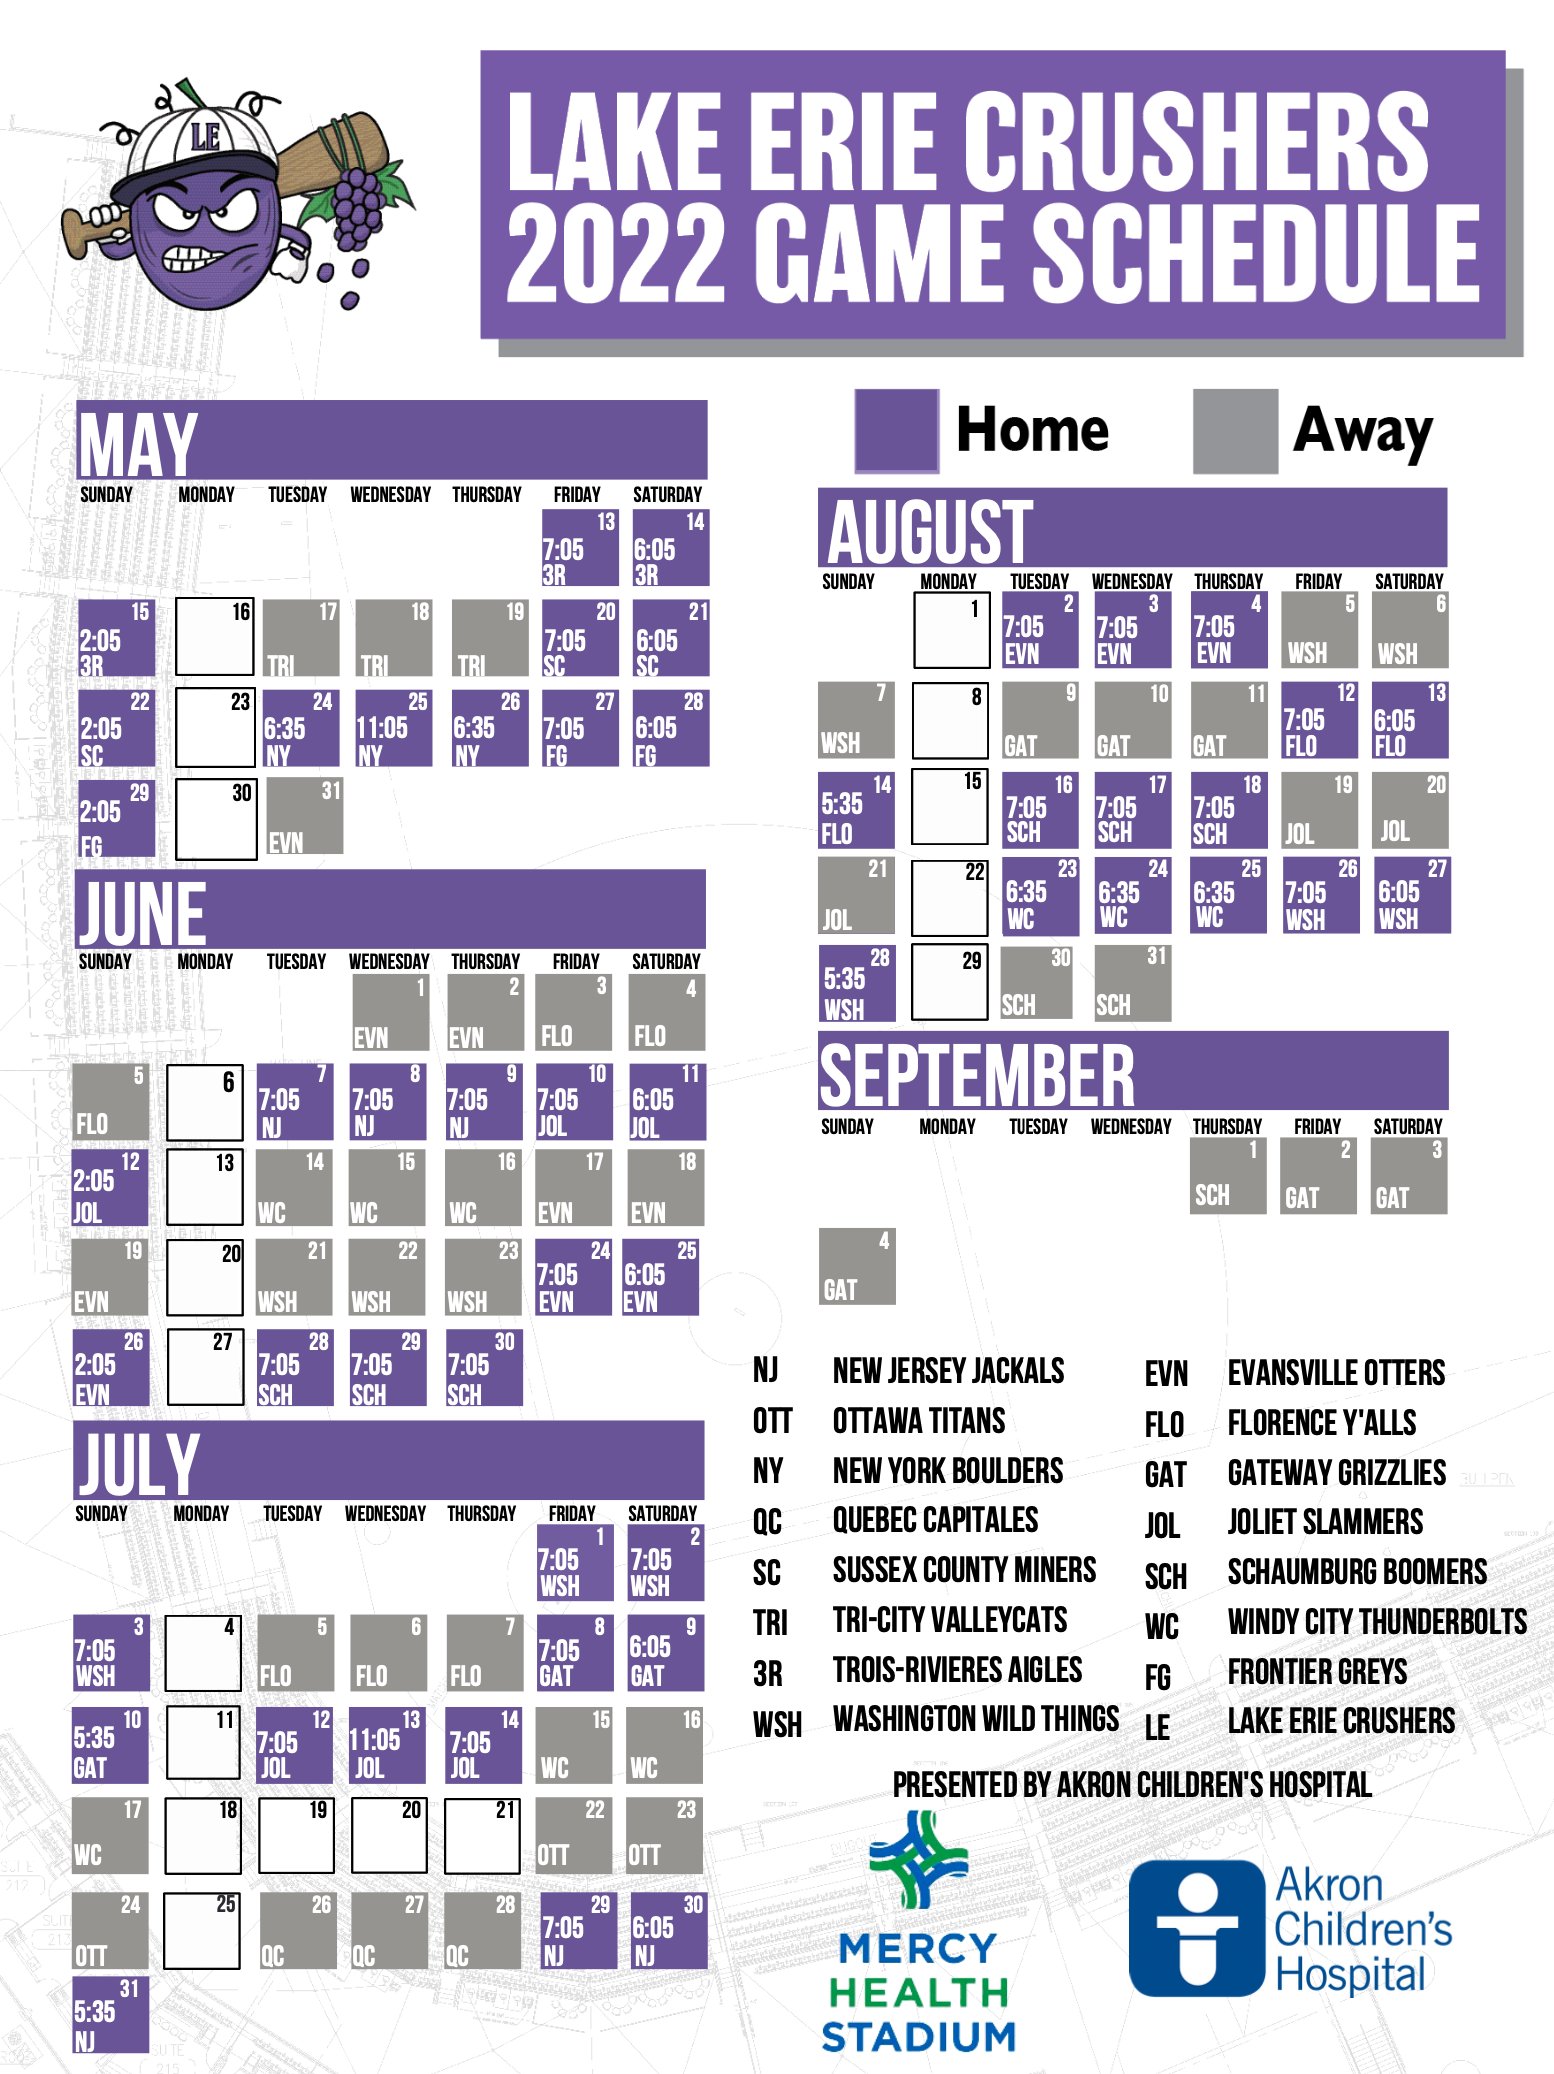 Lake Erie Crushers 2022 Schedule Lake Erie Crushers On Twitter: "The Lake Erie Crushers Officially Have Our  2022 Game Schedule! With 51 Home Games, We Hope To See Everyone Out In The  Ballpark! Call (440)-934-3636 Or Email